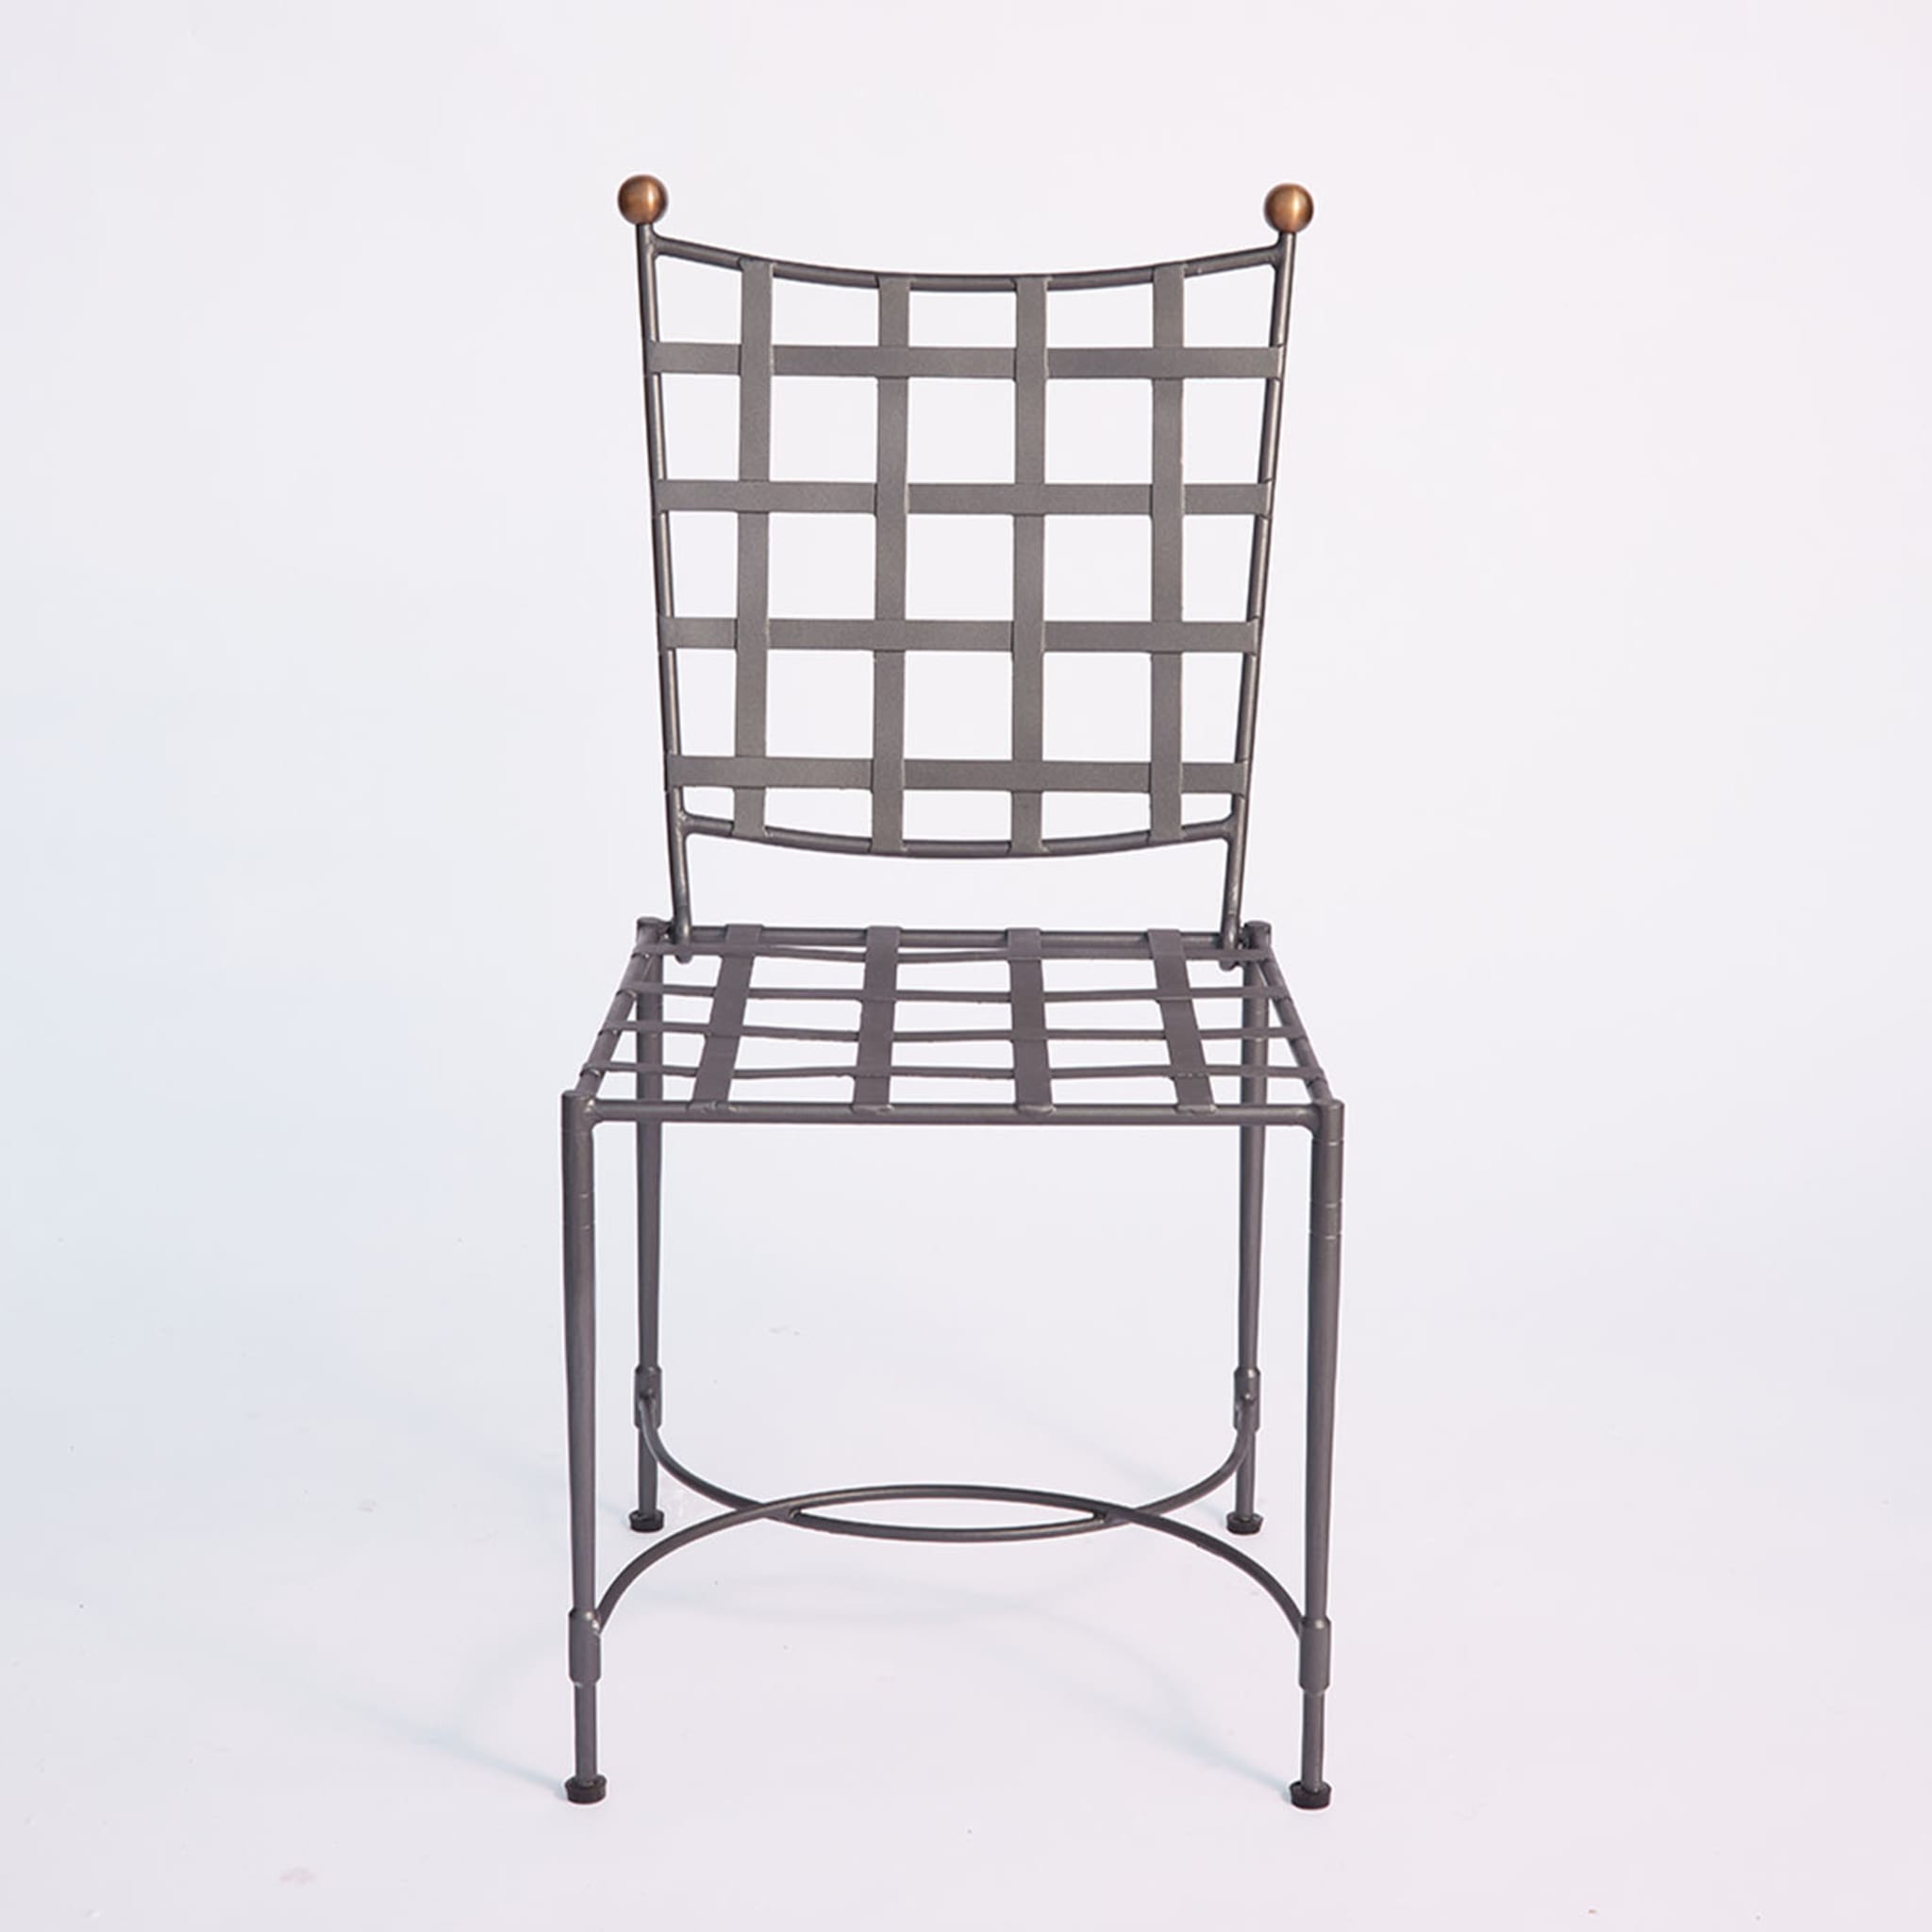 Crossweave Cushioned Wrought-Iron Chair  - Alternative view 1